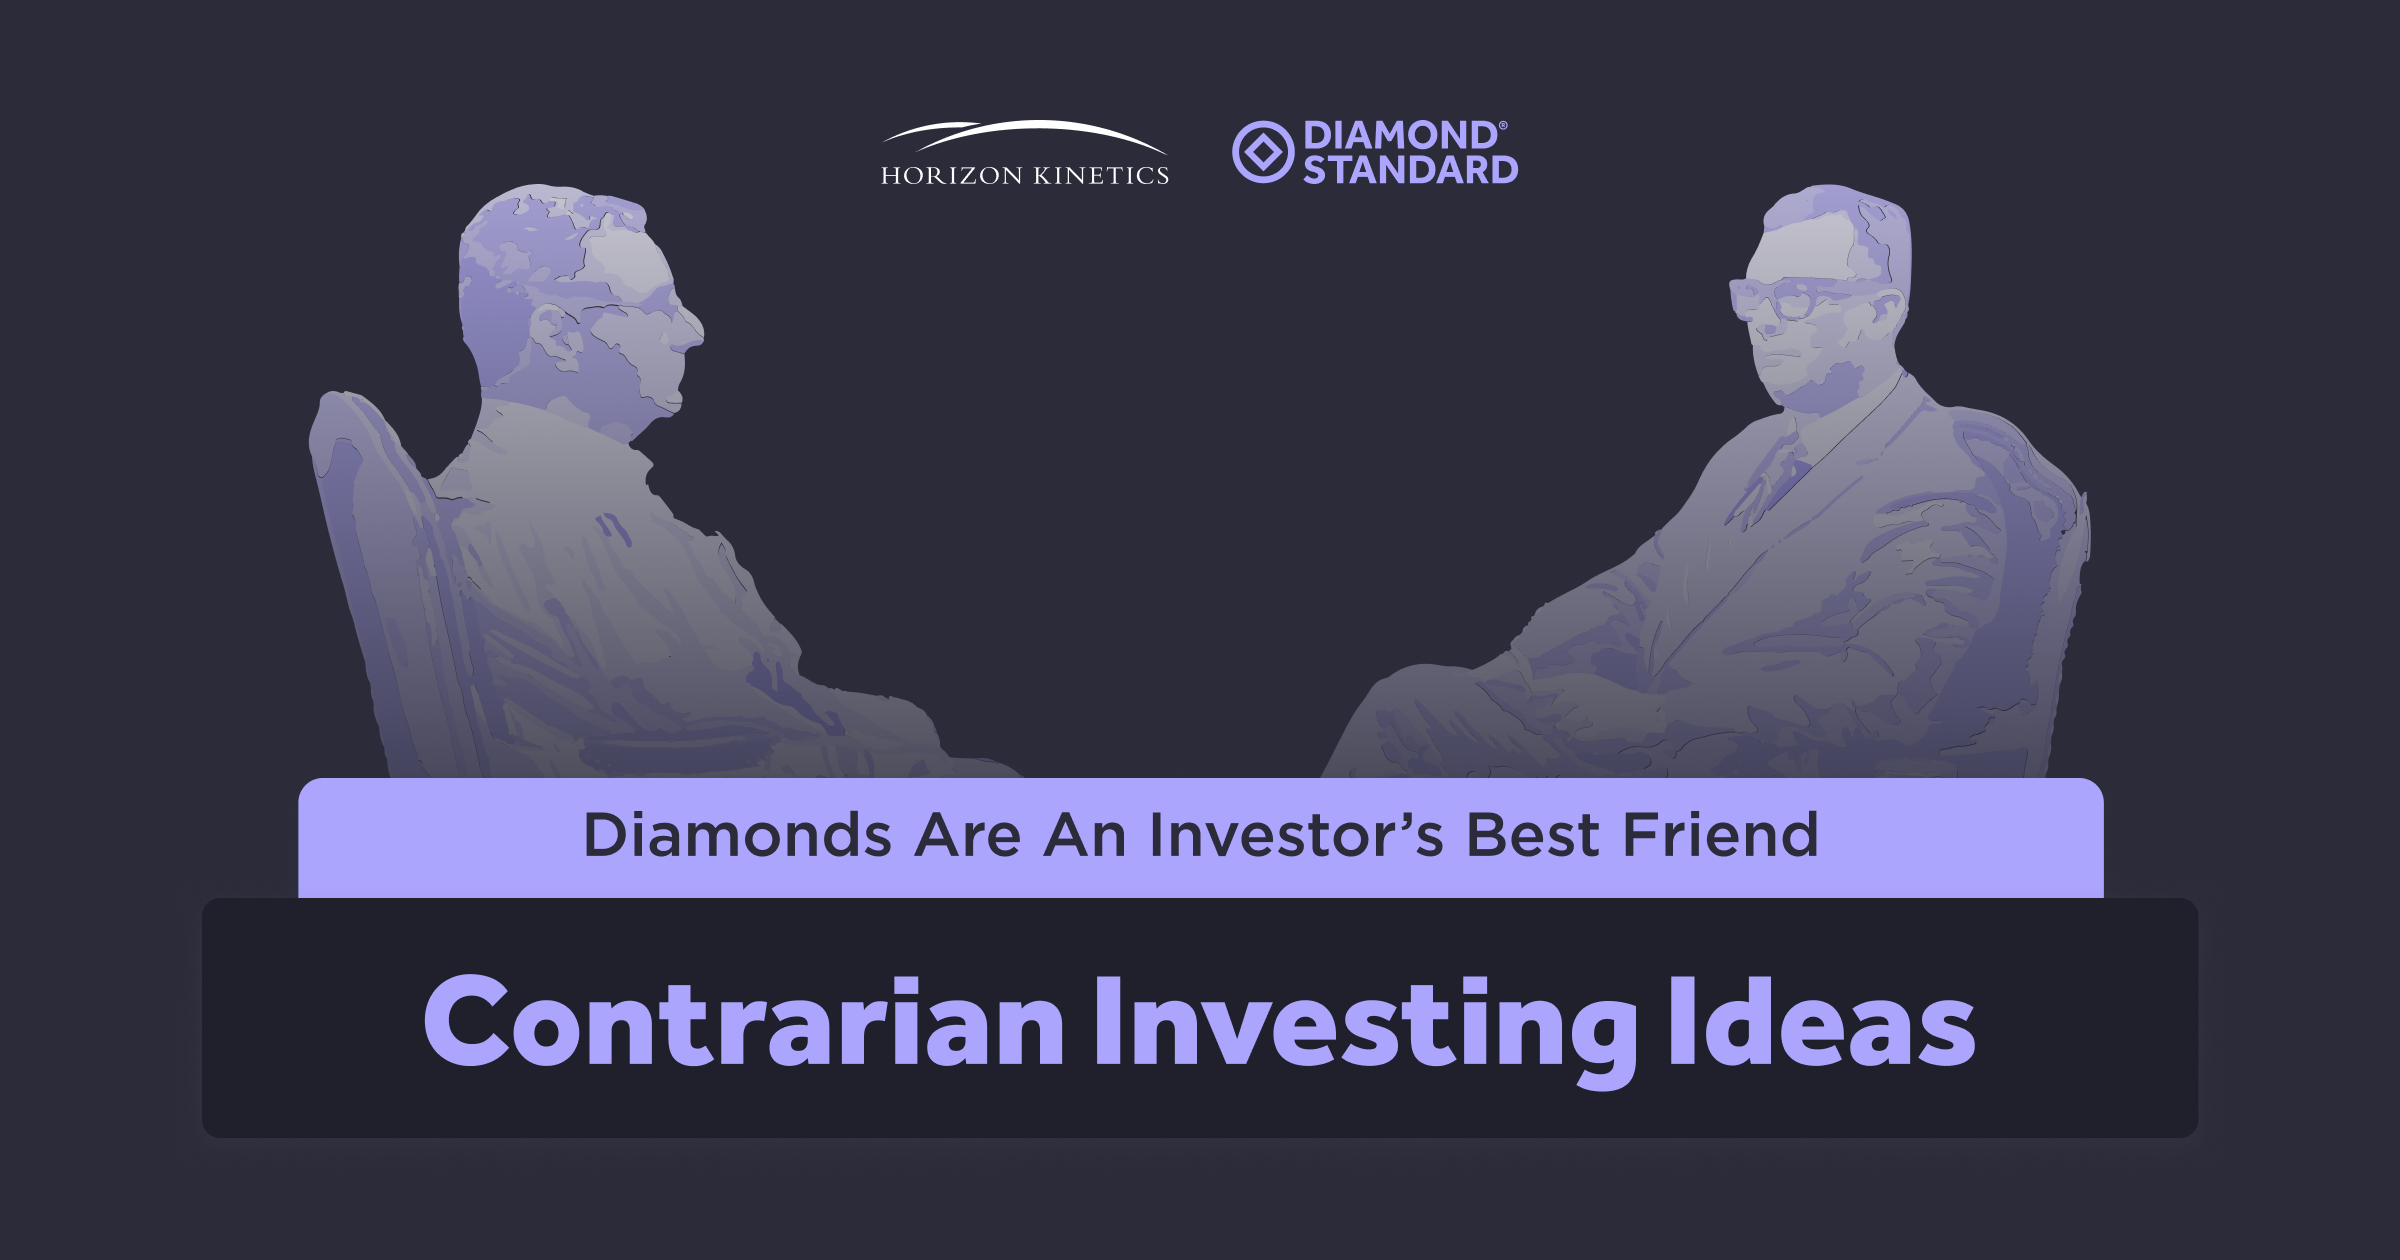 Diamonds Are An Investor’s Best Friend: Contrarian Investing Ideas